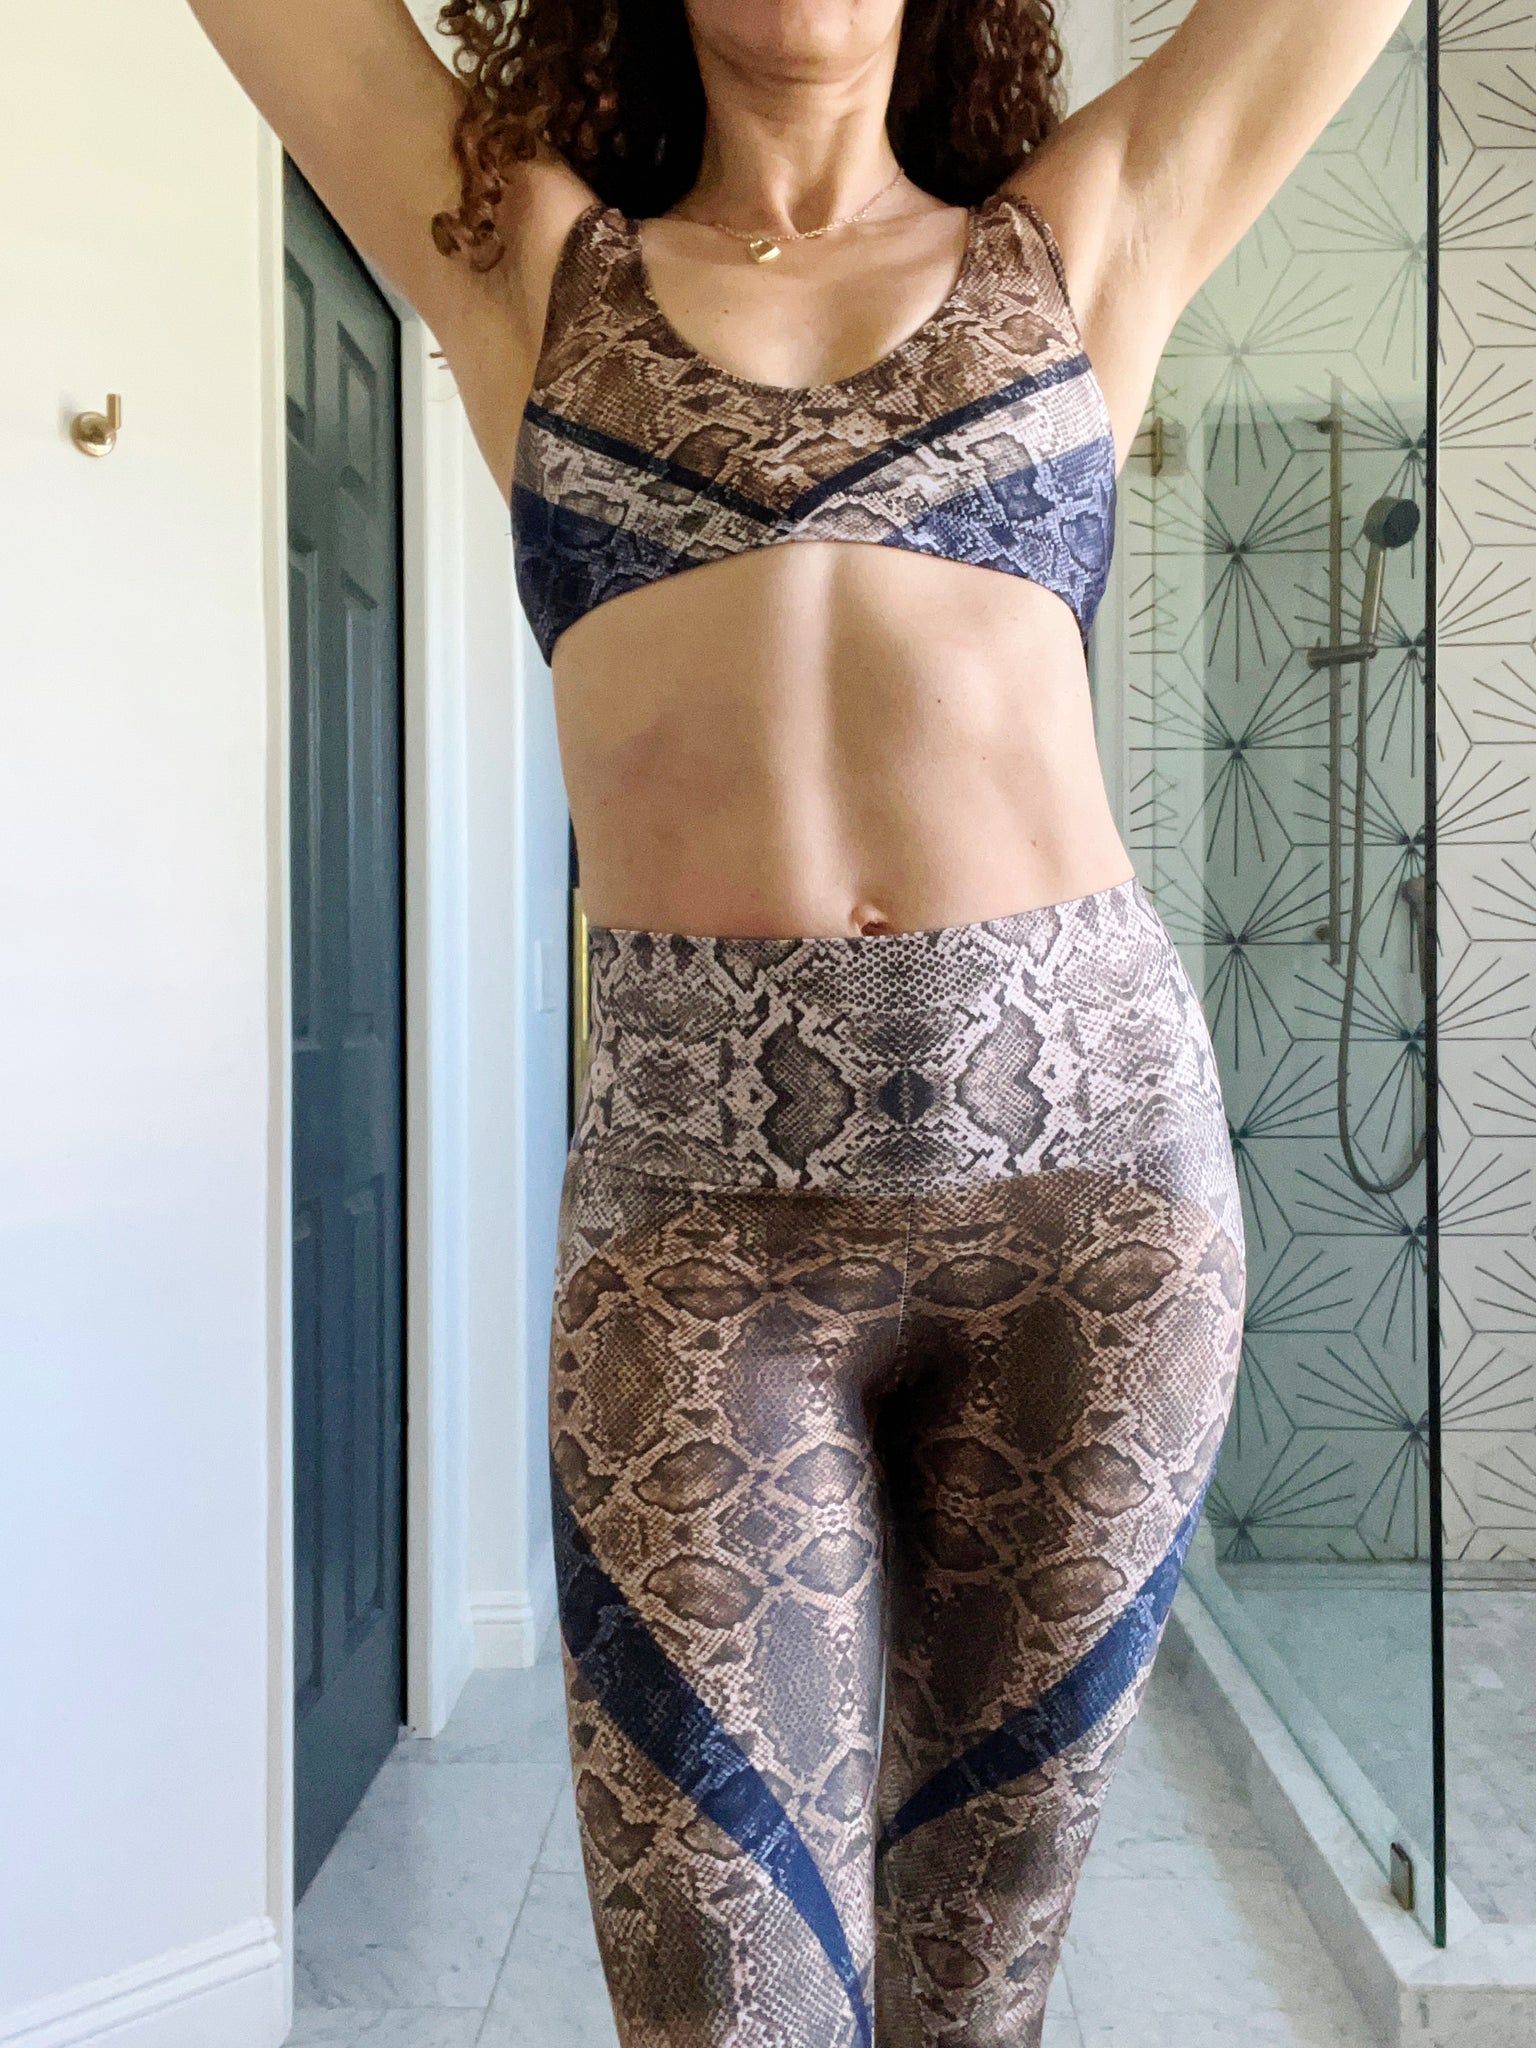 High waisted compression leggings in a natural color palette and snakeskin print.